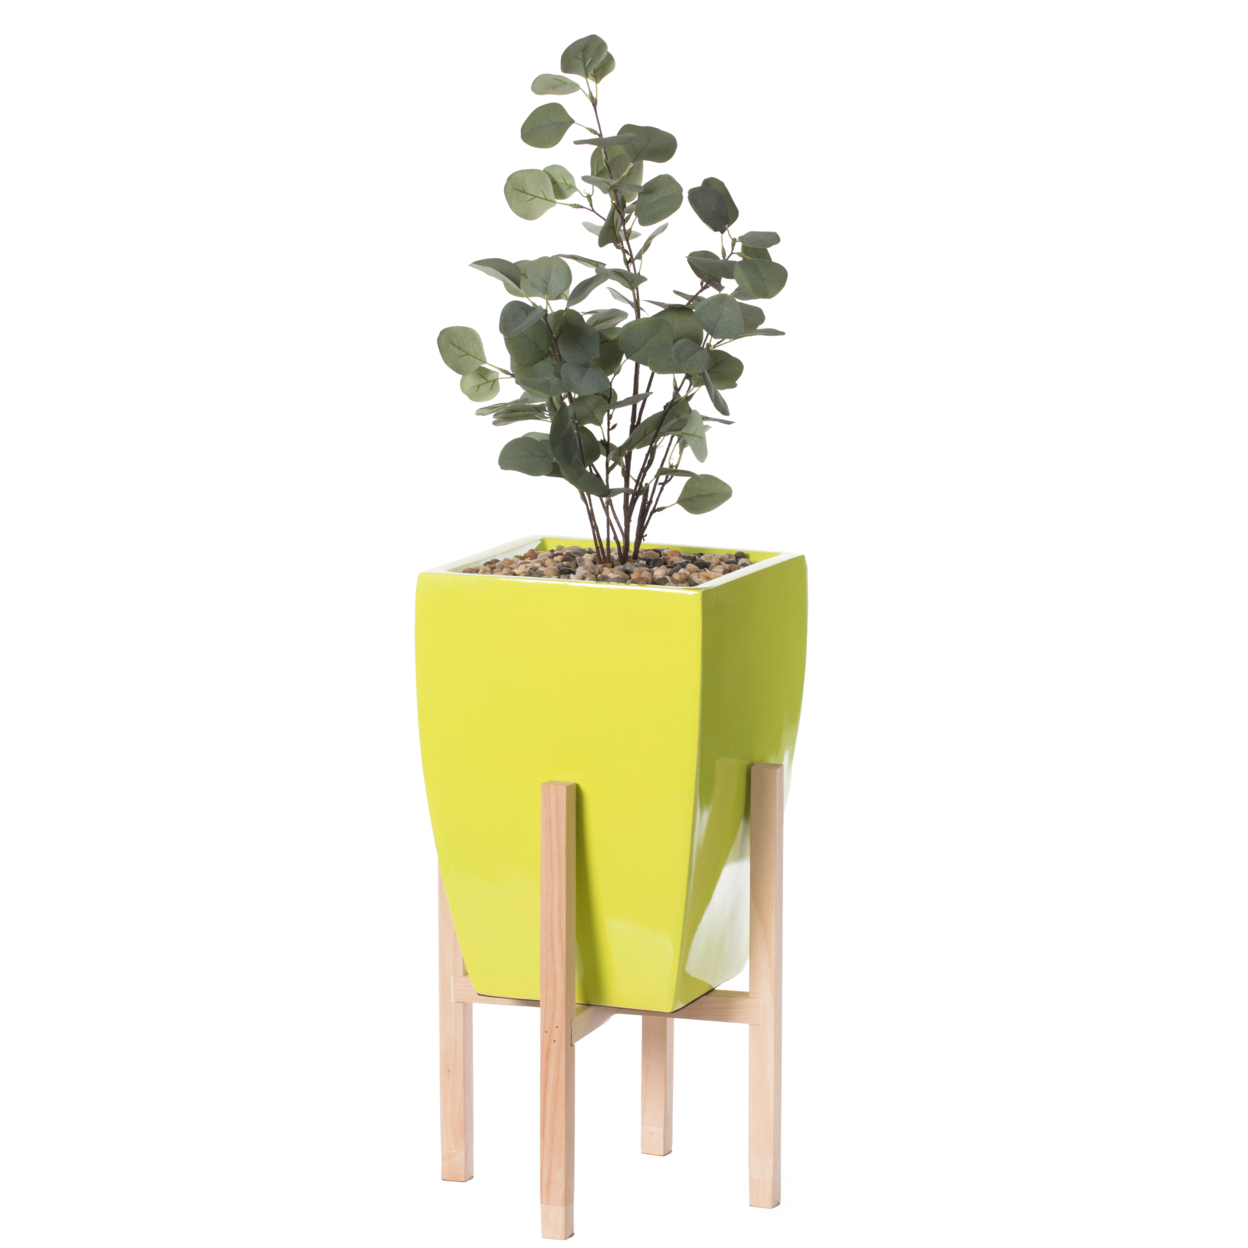 Indoor Decorative Square Planter With Wooden Stand - Green